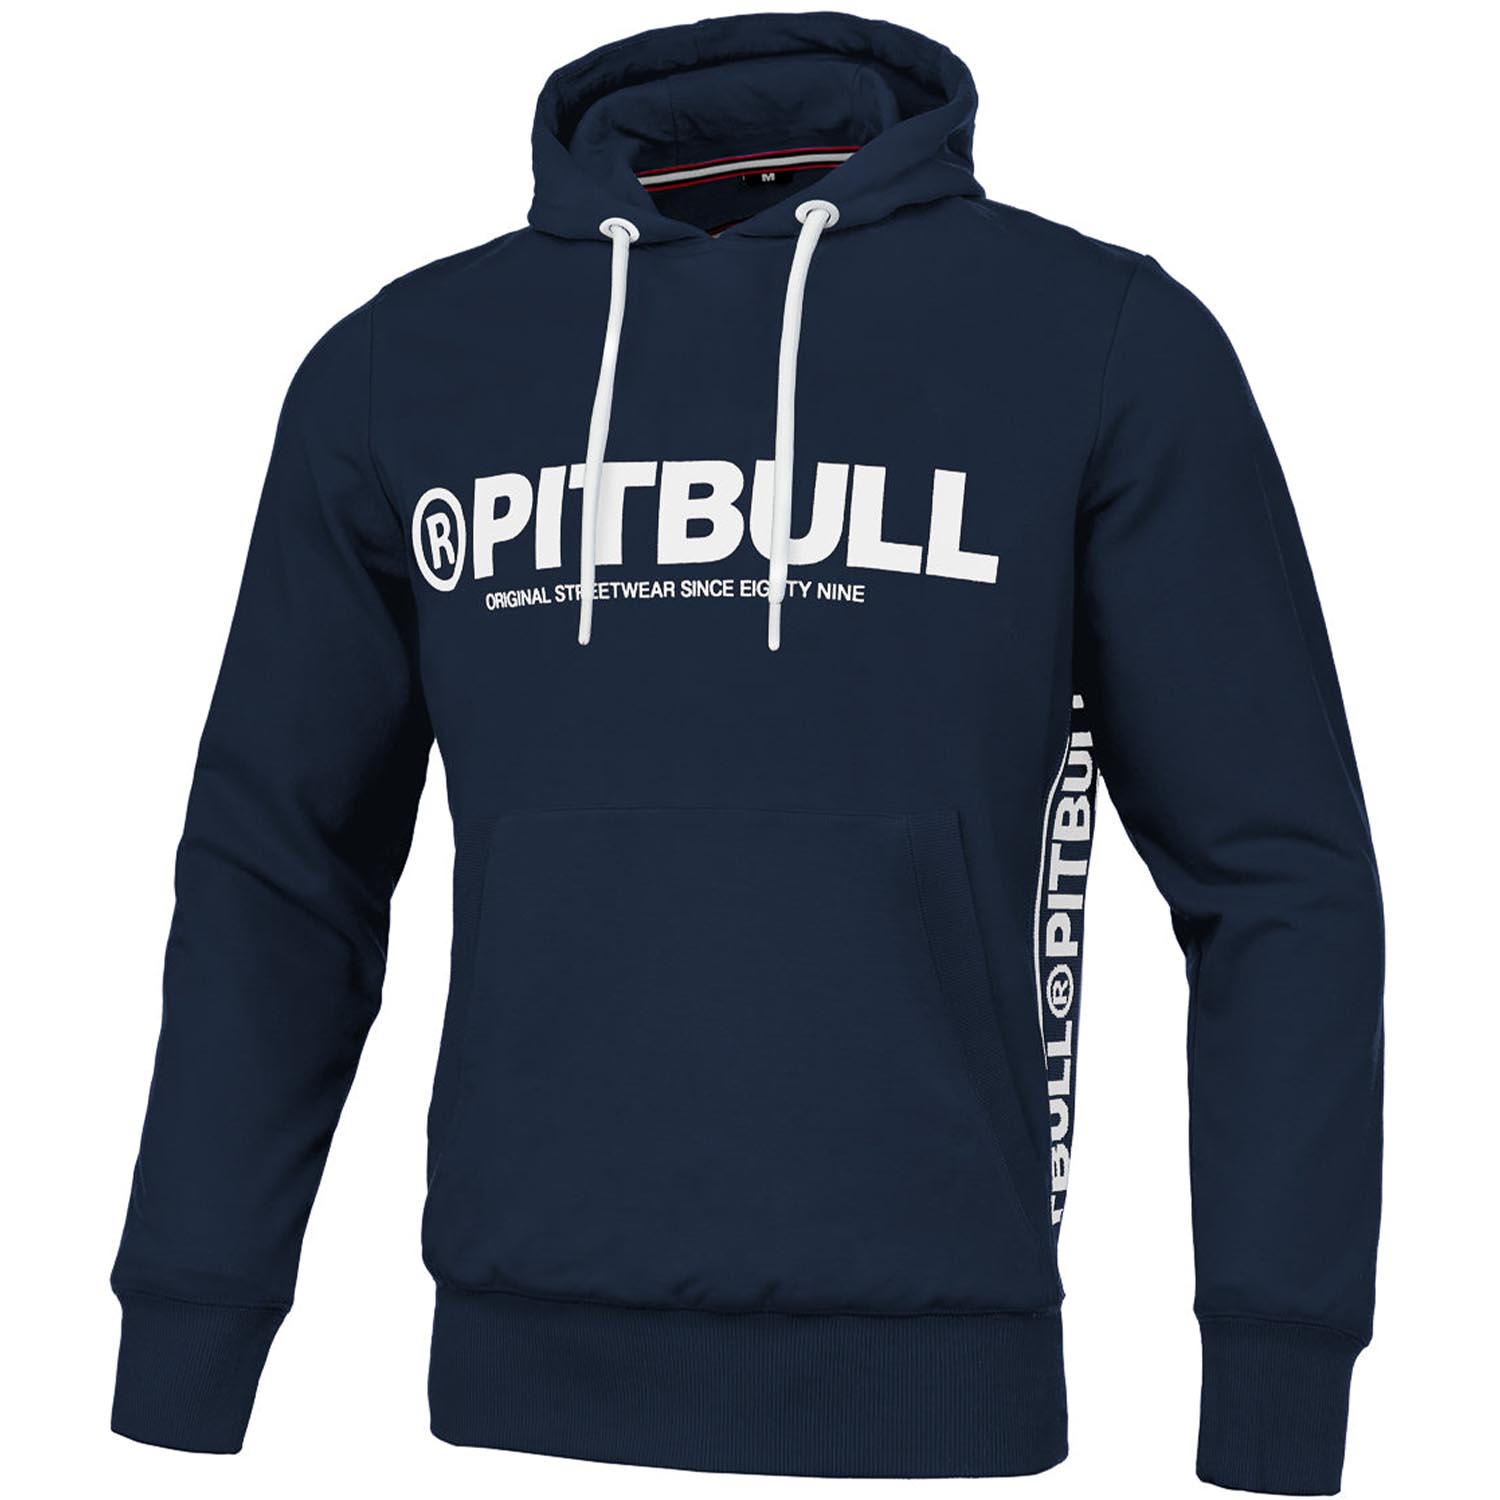 Pit Bull West Coast Hoody, Olympic French Terry, navy